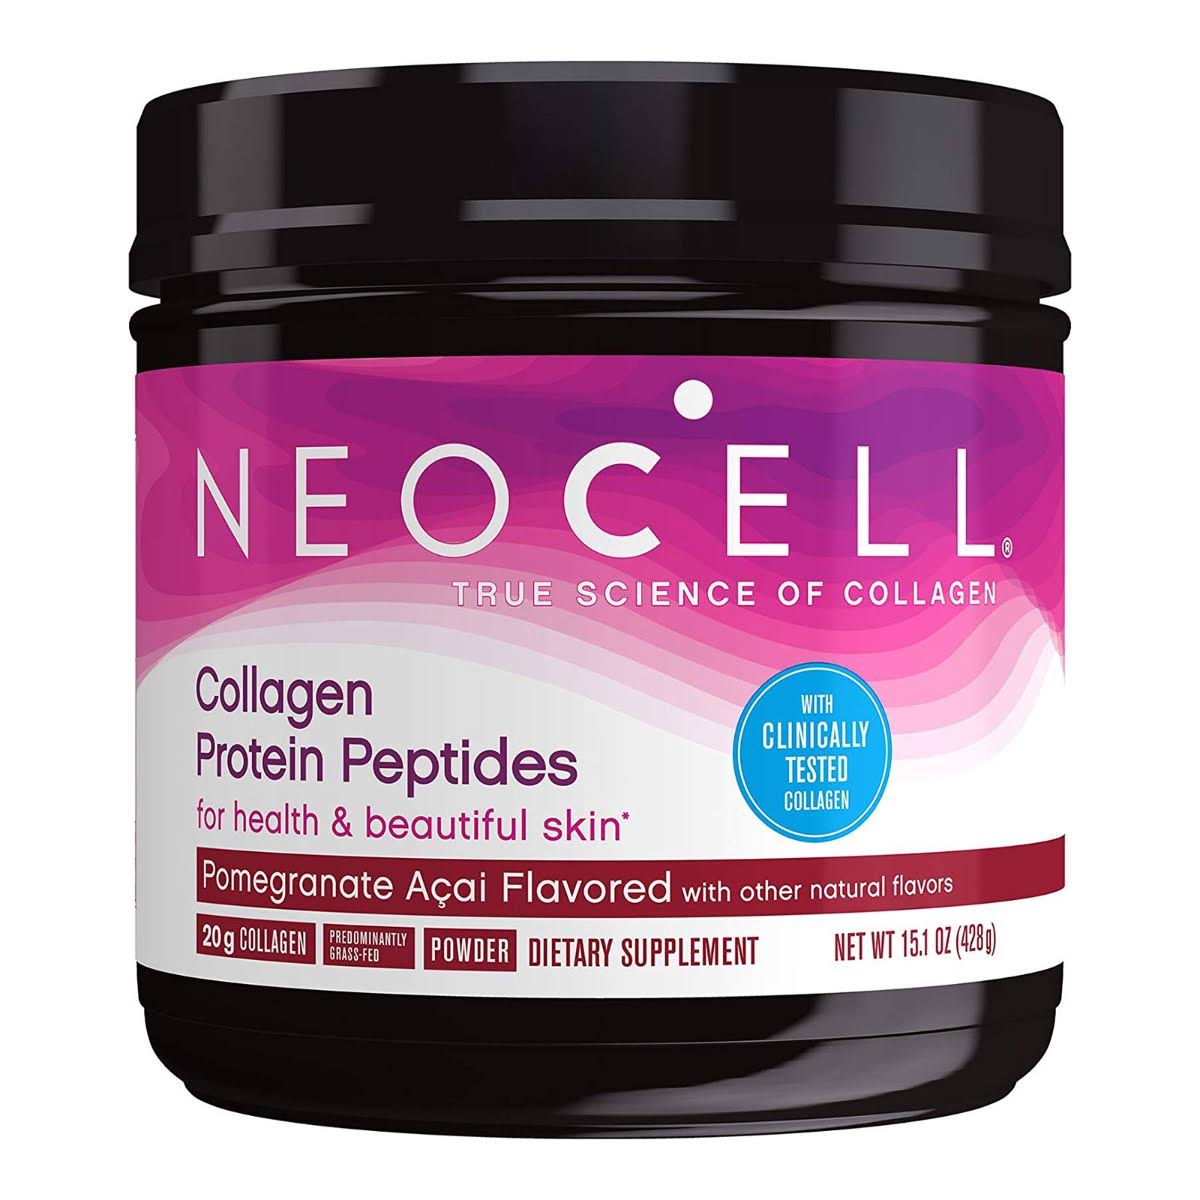 Neocell, Collagen Protein Peptides, Pomagranate Acai, 15.1 oz (428 g)